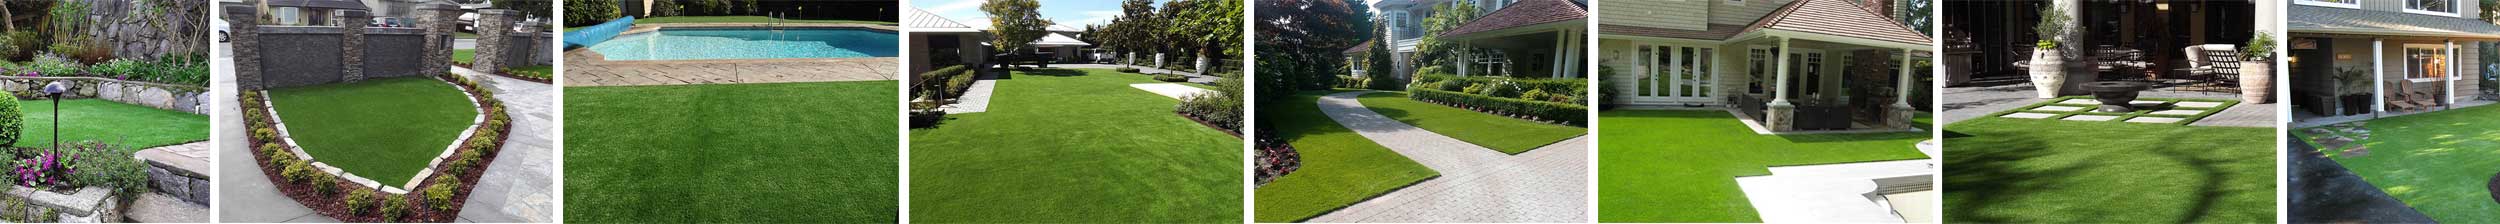 artificial grass residential homes